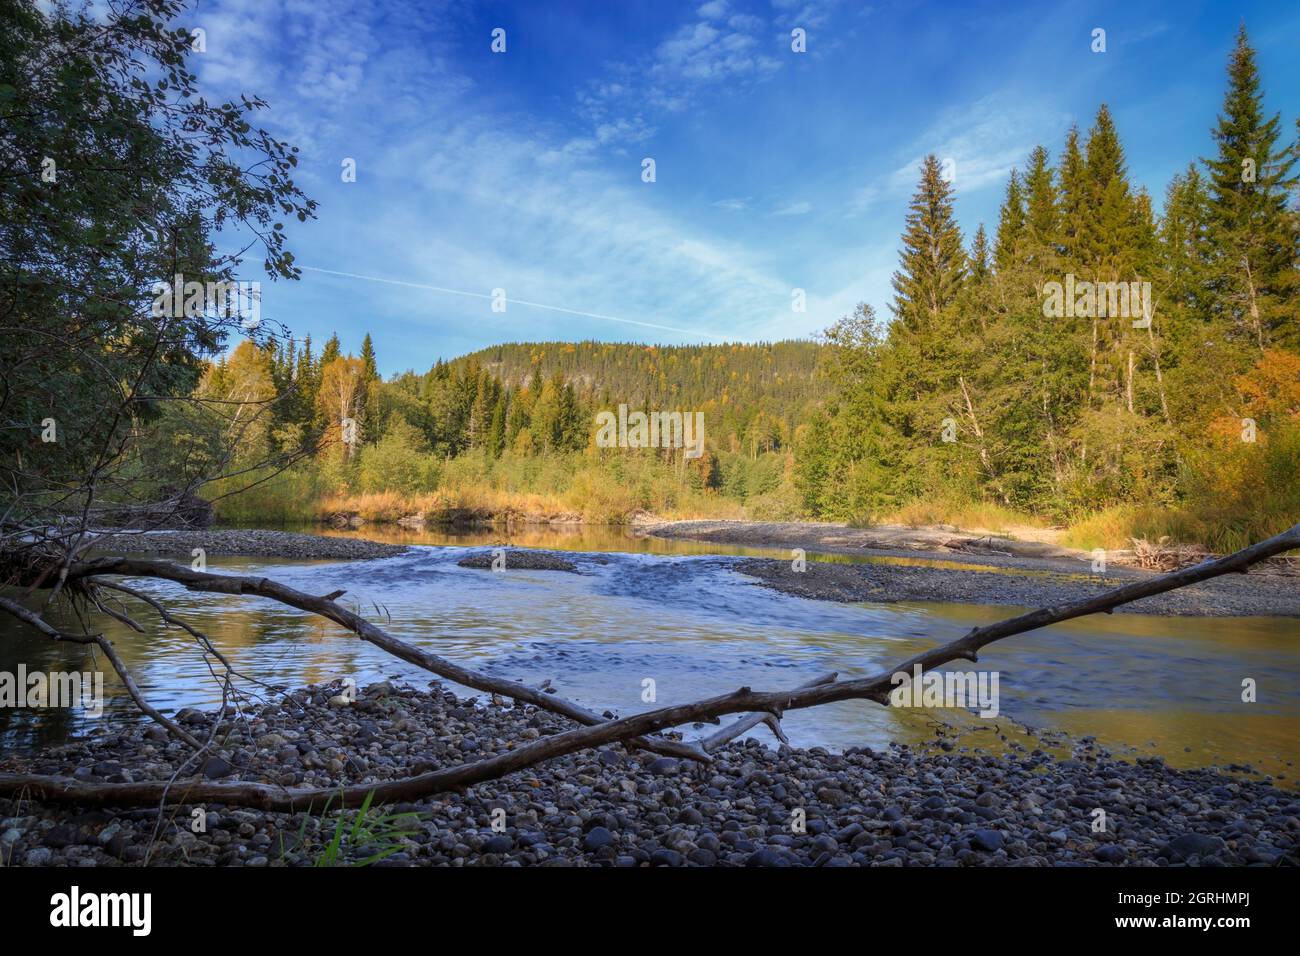 stones in a river forest mountain landscape Stock Photo